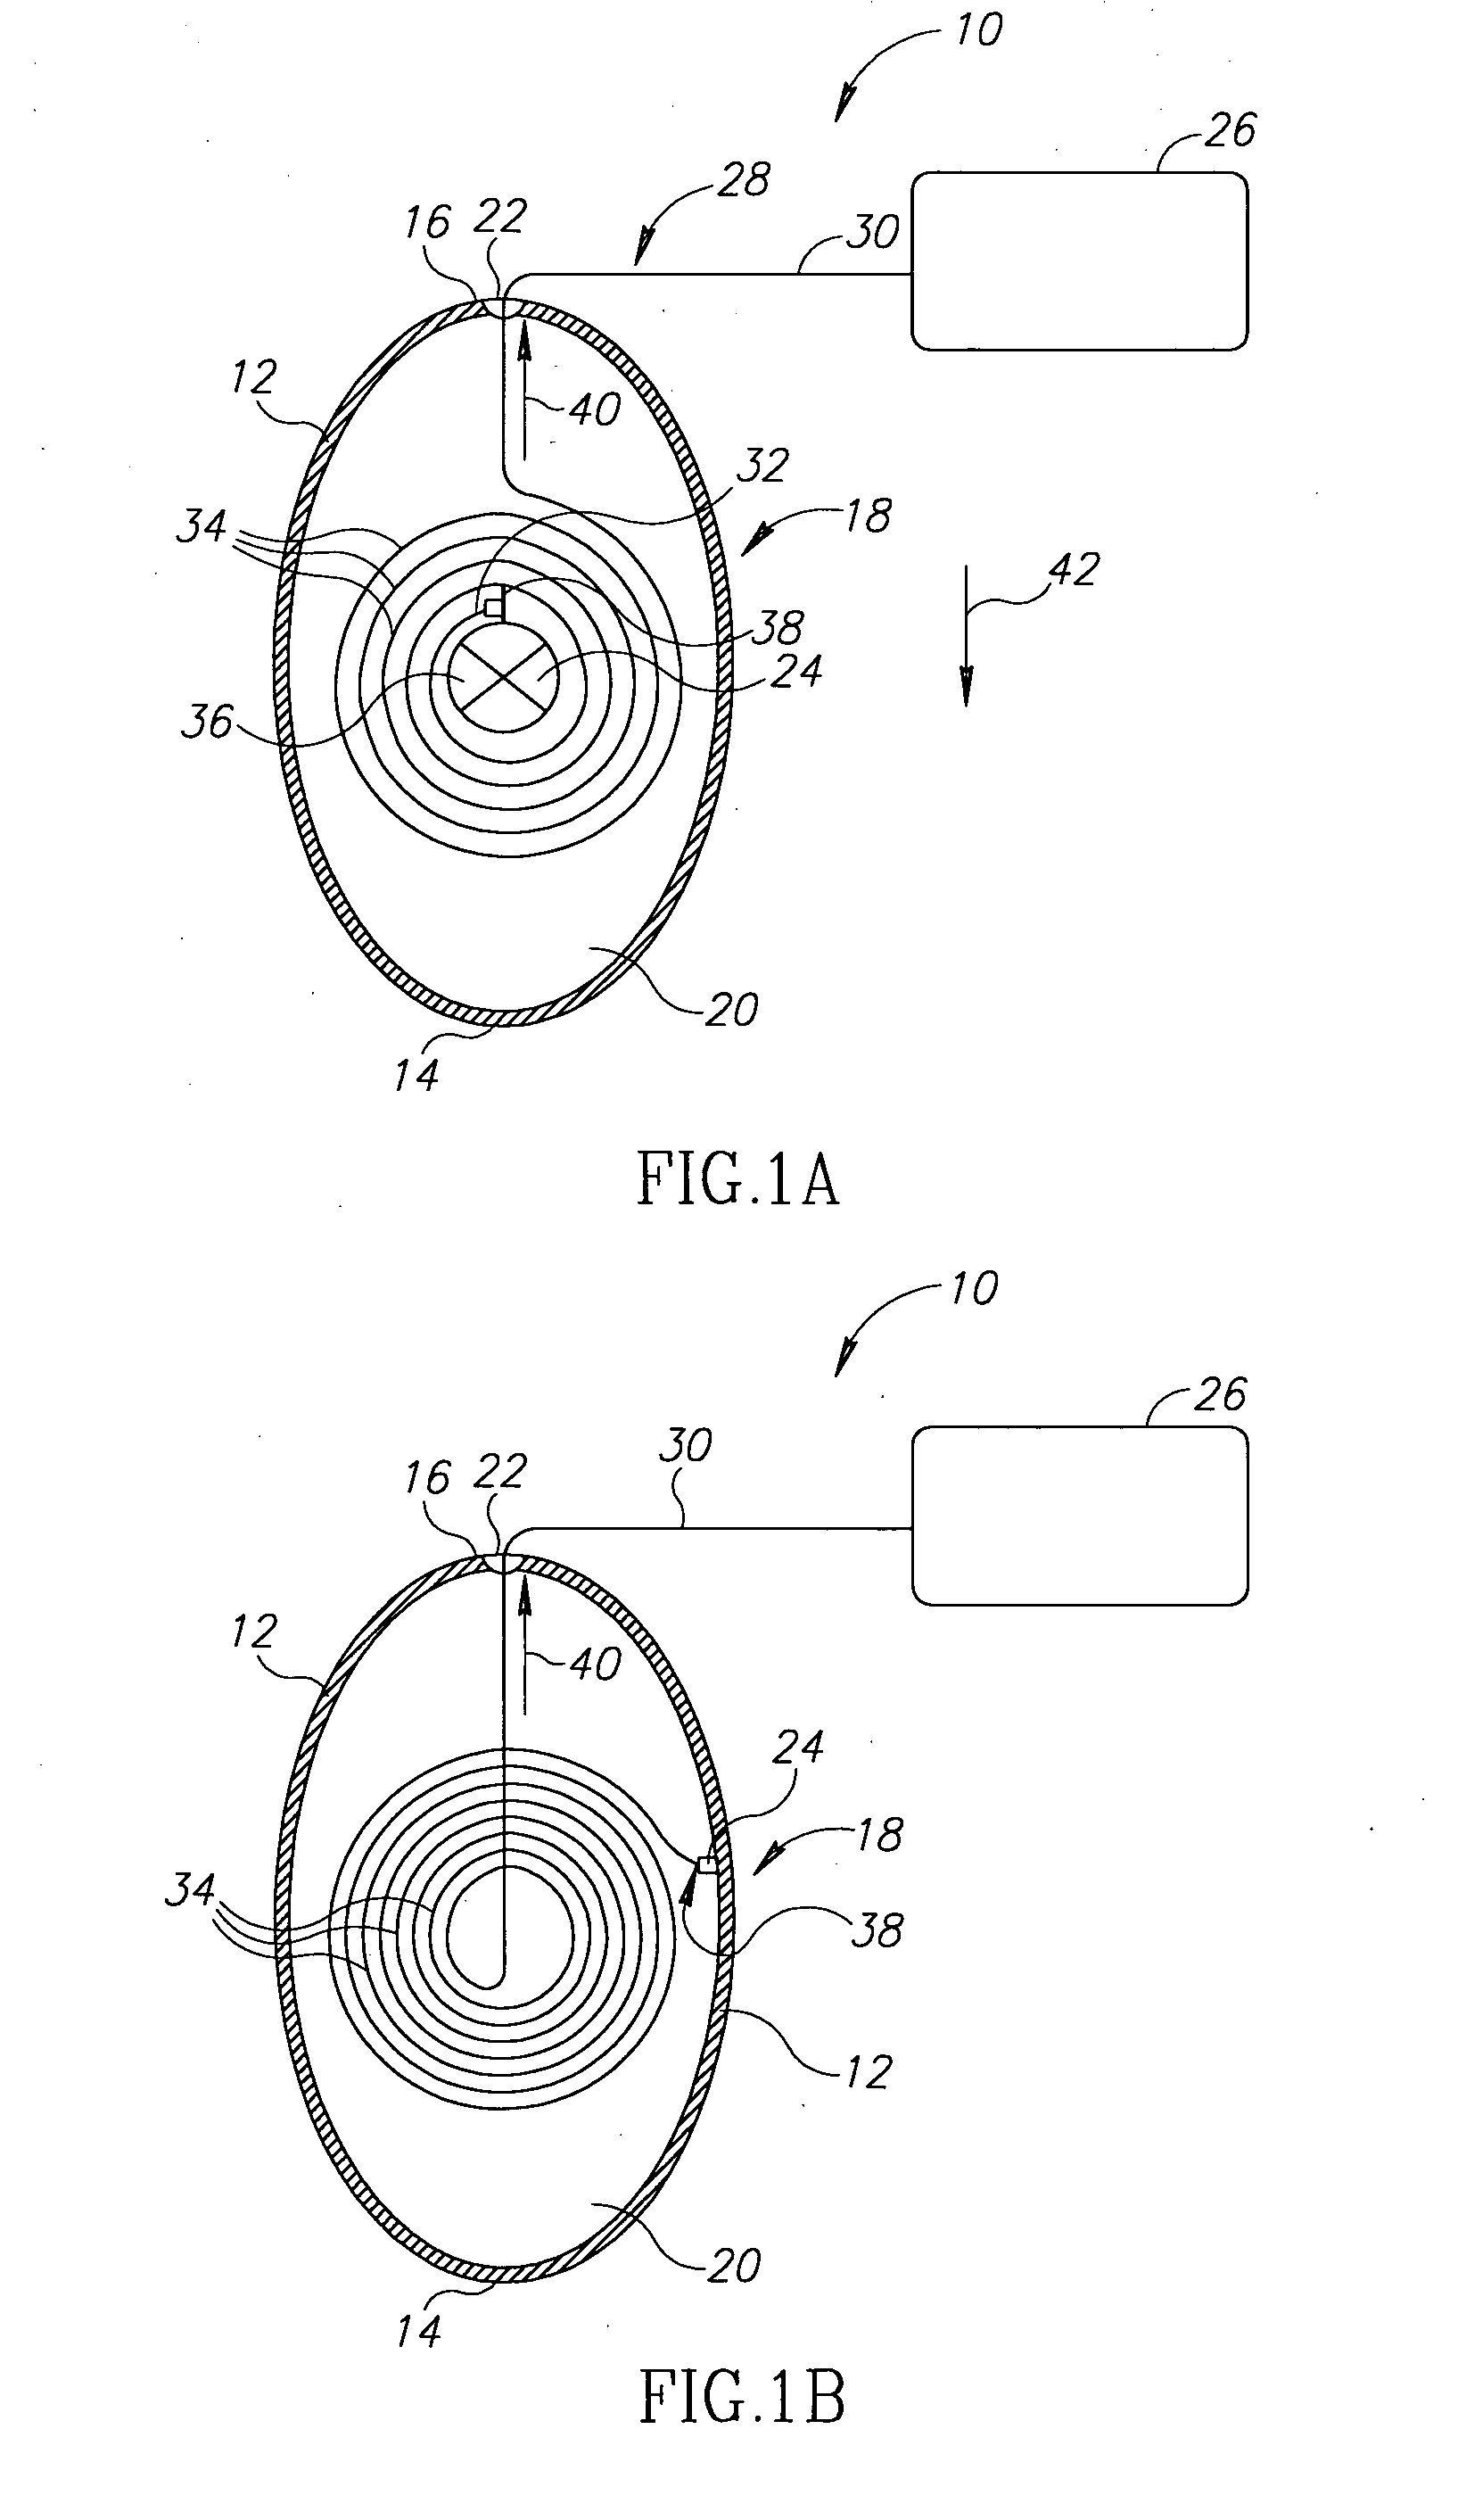 System and method for guiding of gastrointestinal device through the gastrointestinal tract